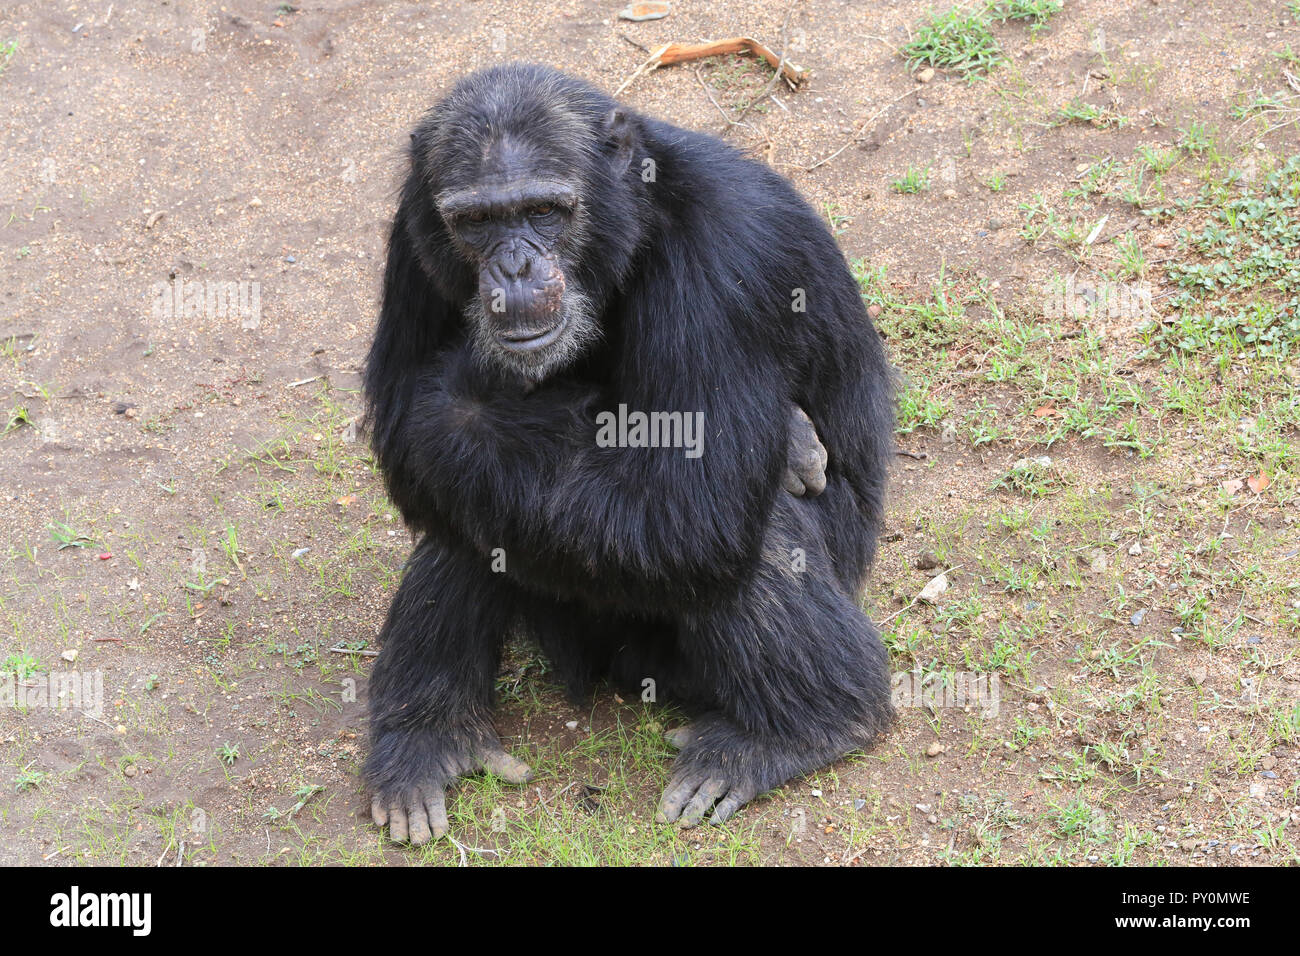 The chimpanzee named Socrates at the Sweetwaters Chimpanzee Sanctuary at Ol Pejeta Conservancy in Laikipia County, Kenya. Stock Photo